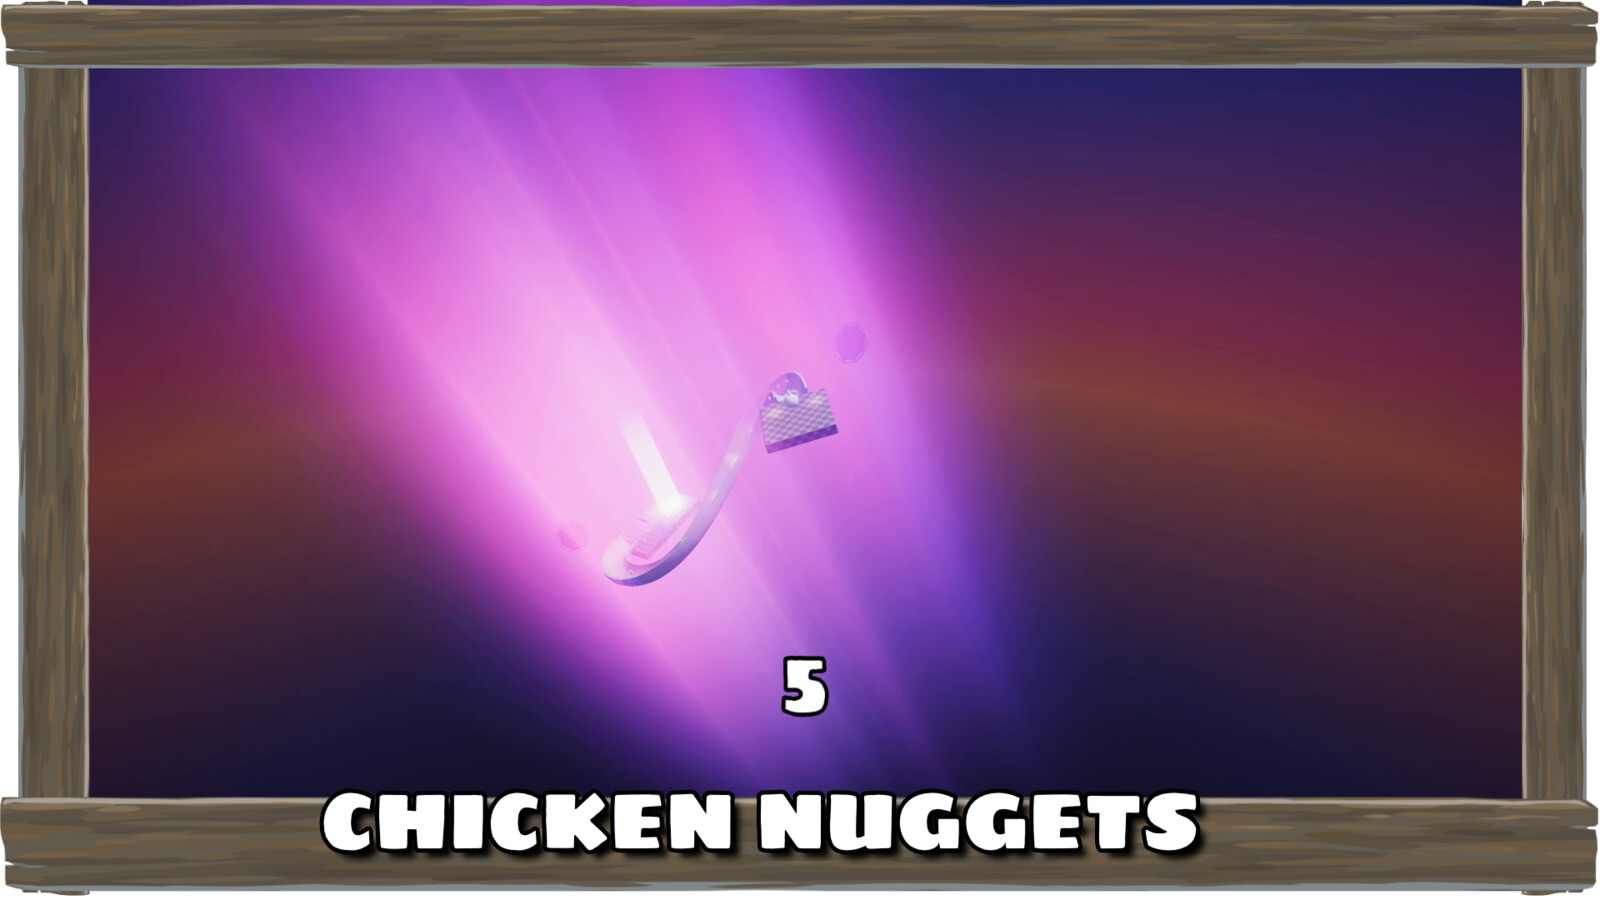 Chicken Nuggets uses may worlds adn looks to tell a vissual story.